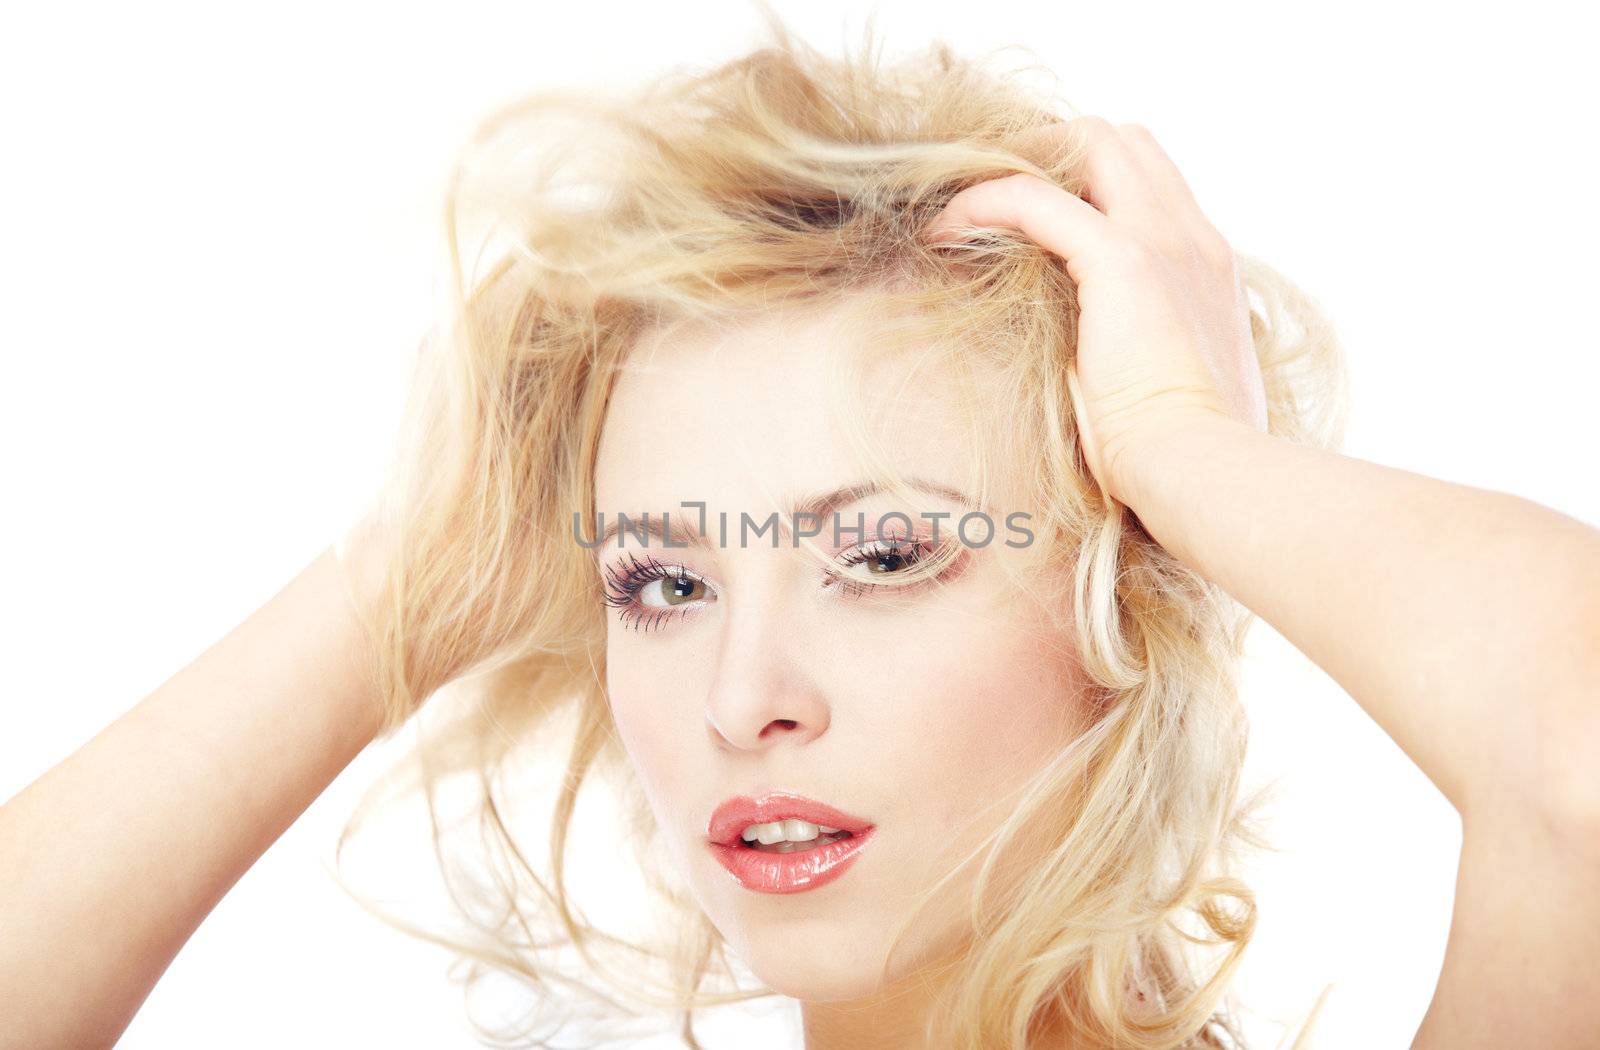 Headshot of the blond lady with perfect makeup on a white background